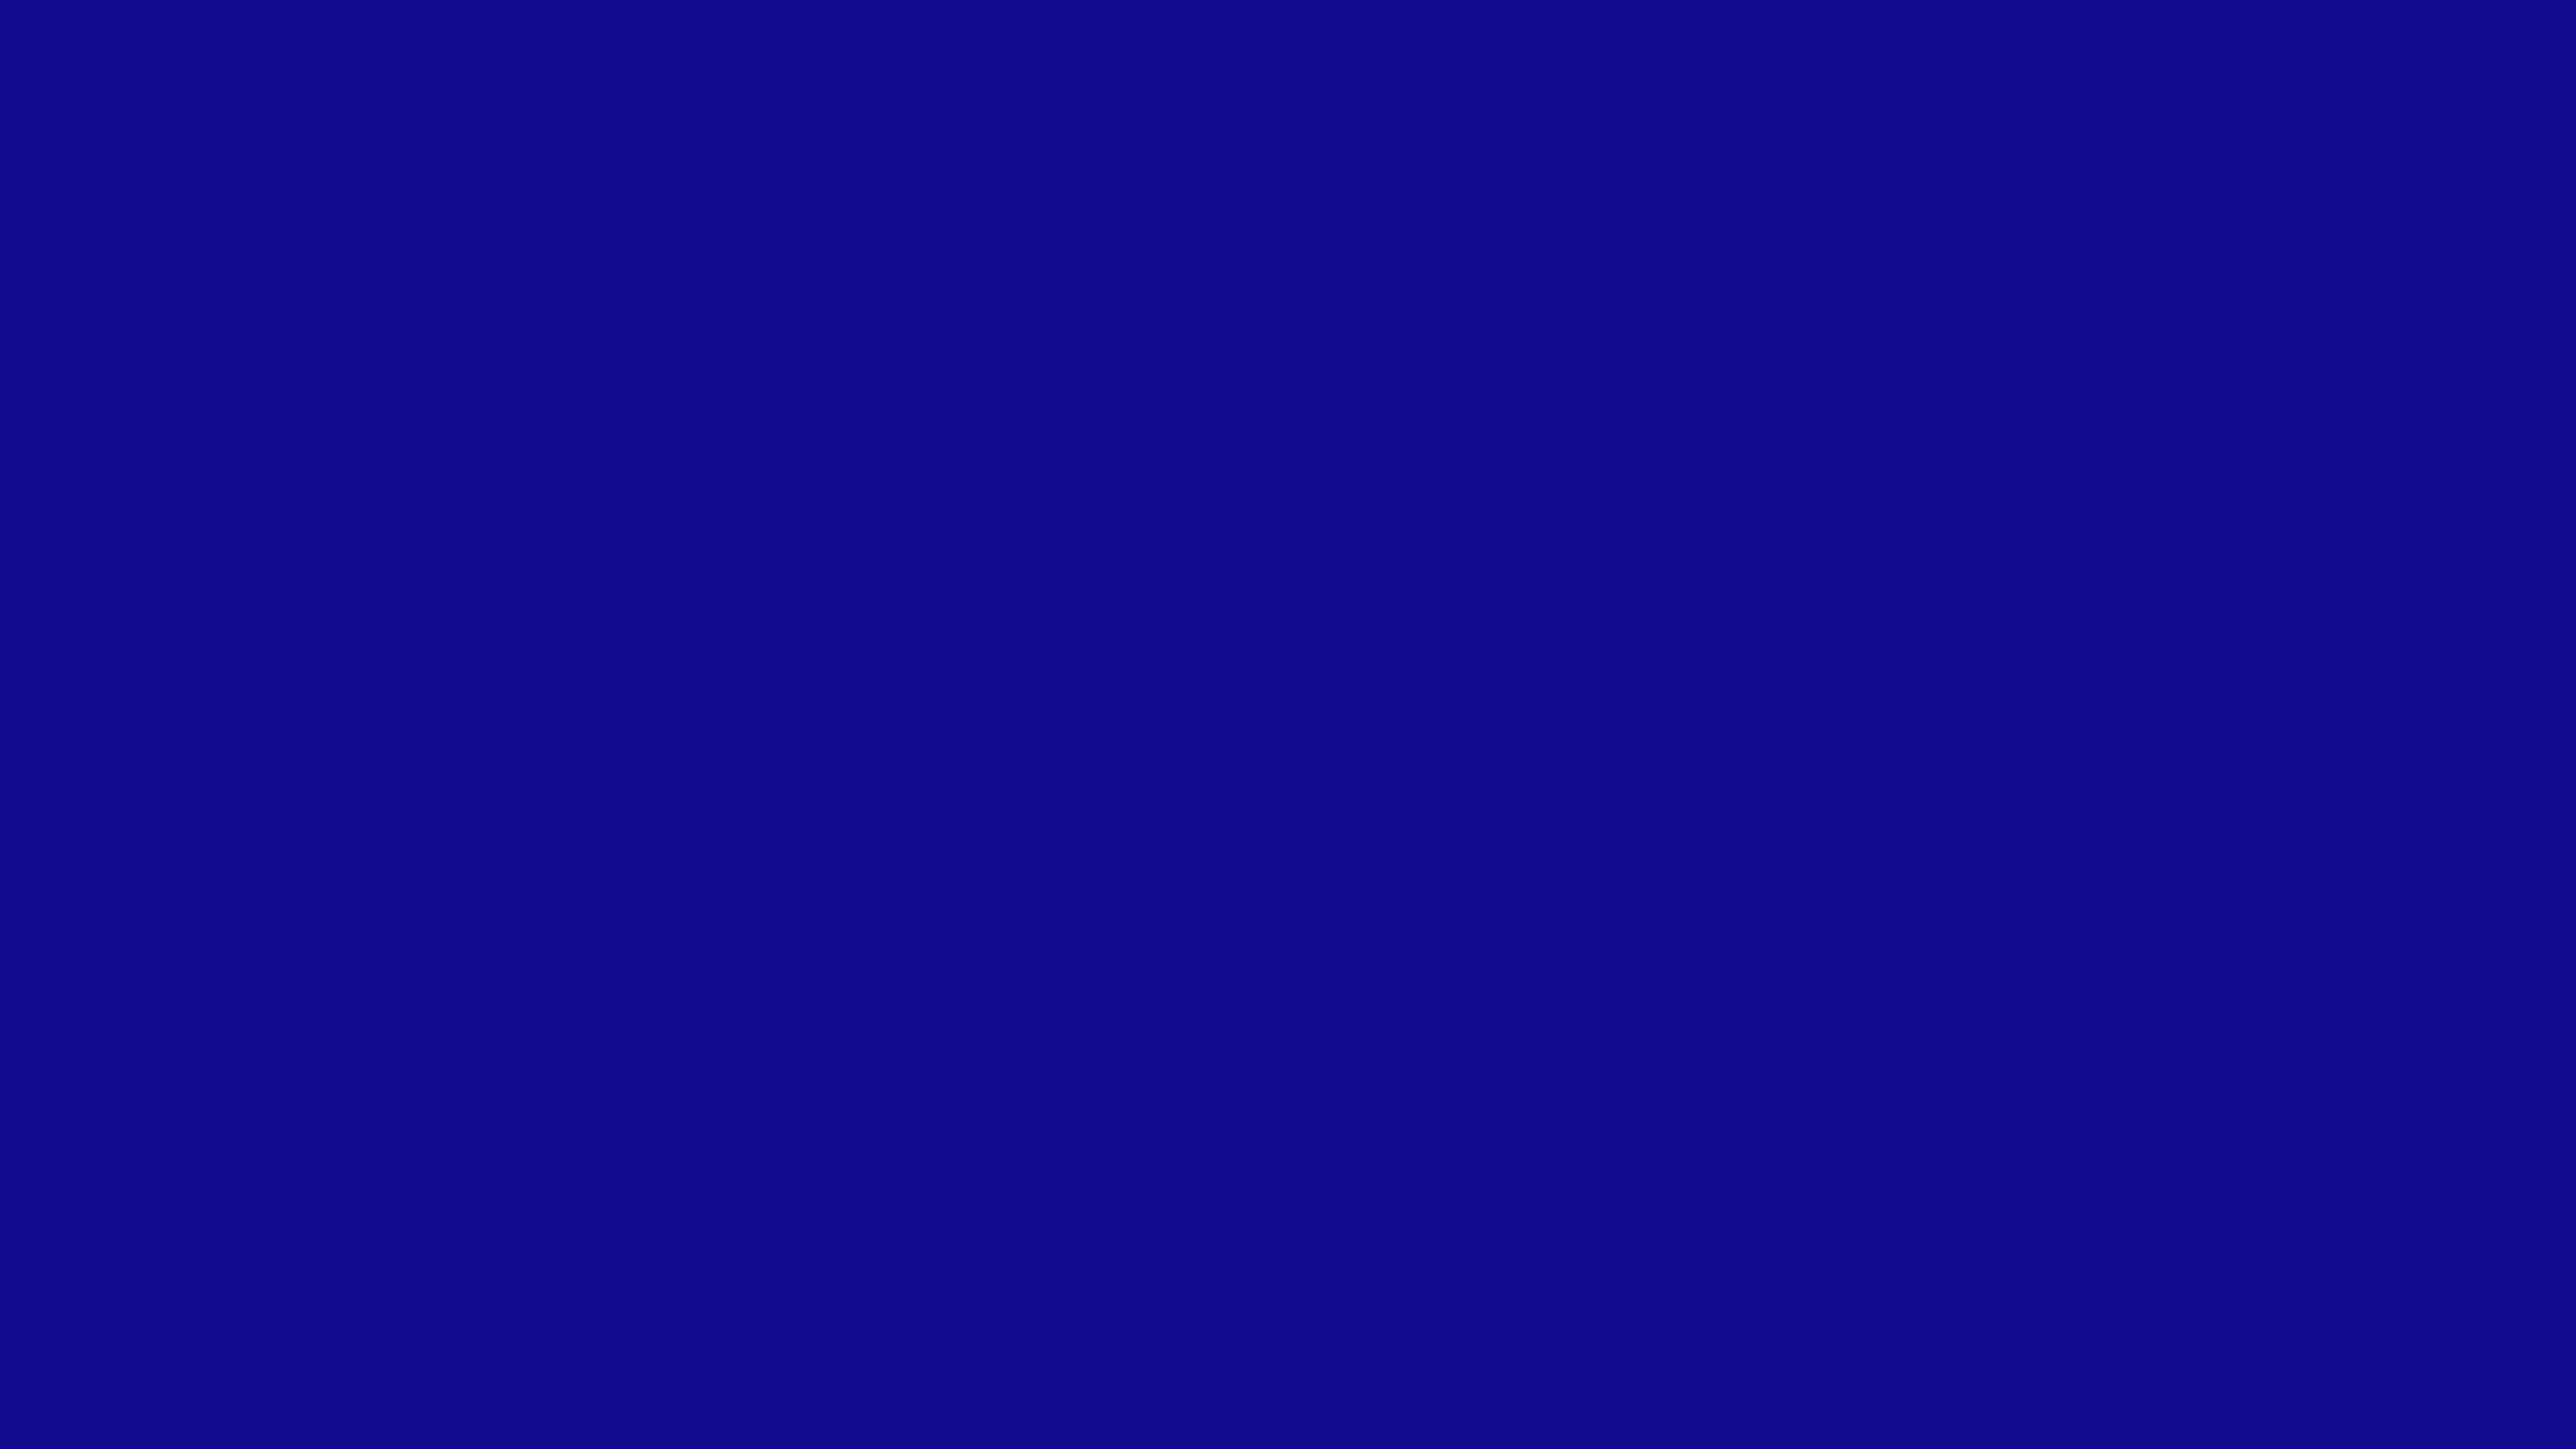 7680x4320 Ultramarine Solid Color Background